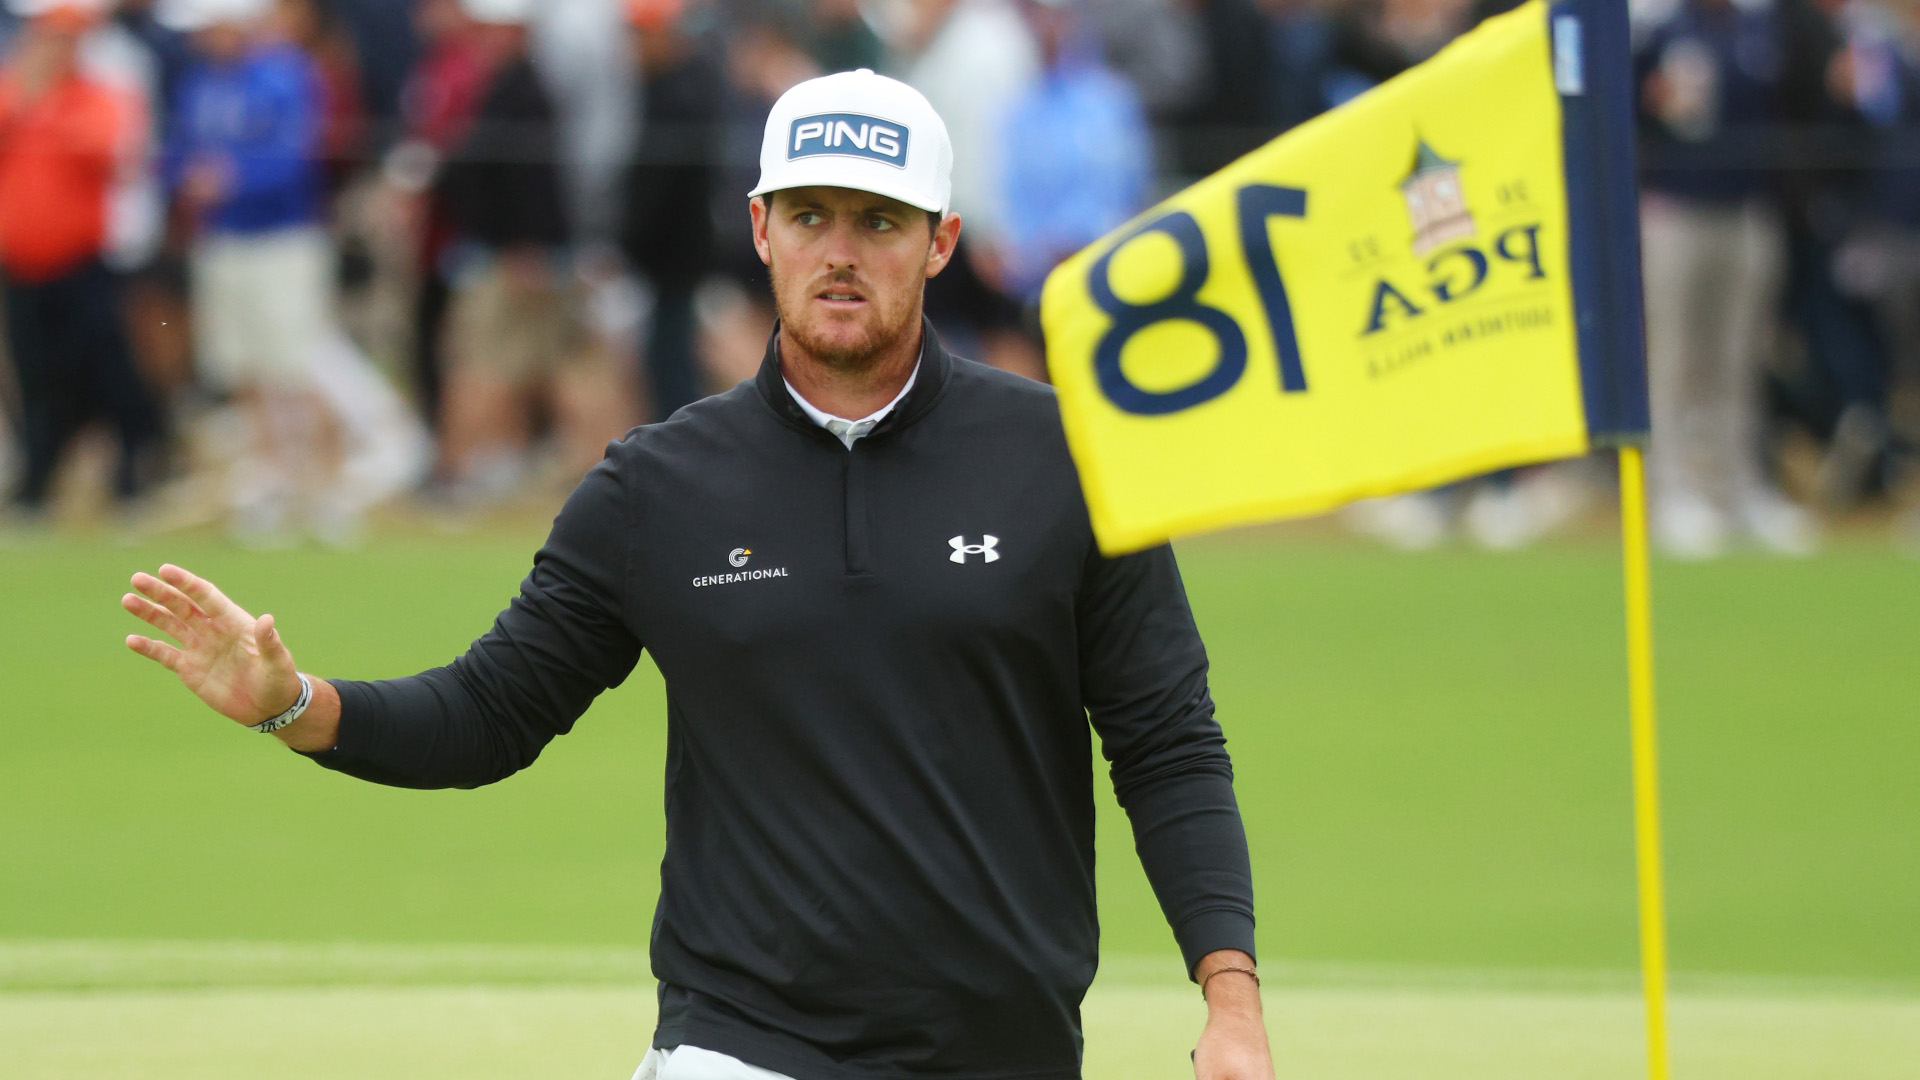 2022 PGA Championship live stream and how to watch the final round at Southern Hills What Hi-Fi?